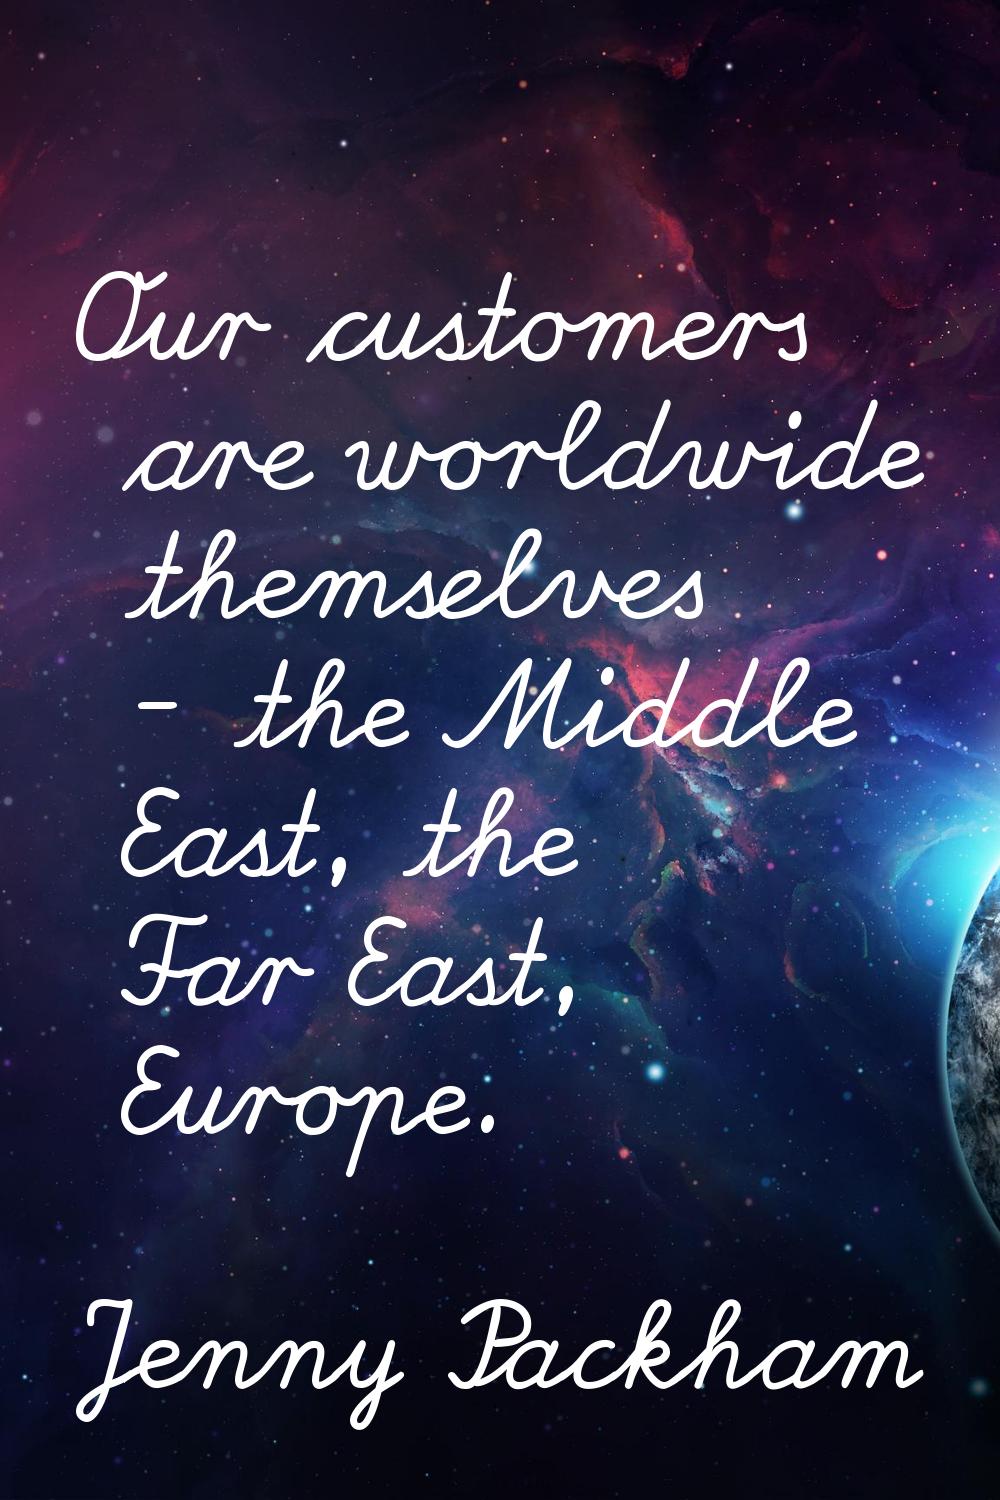 Our customers are worldwide themselves - the Middle East, the Far East, Europe.